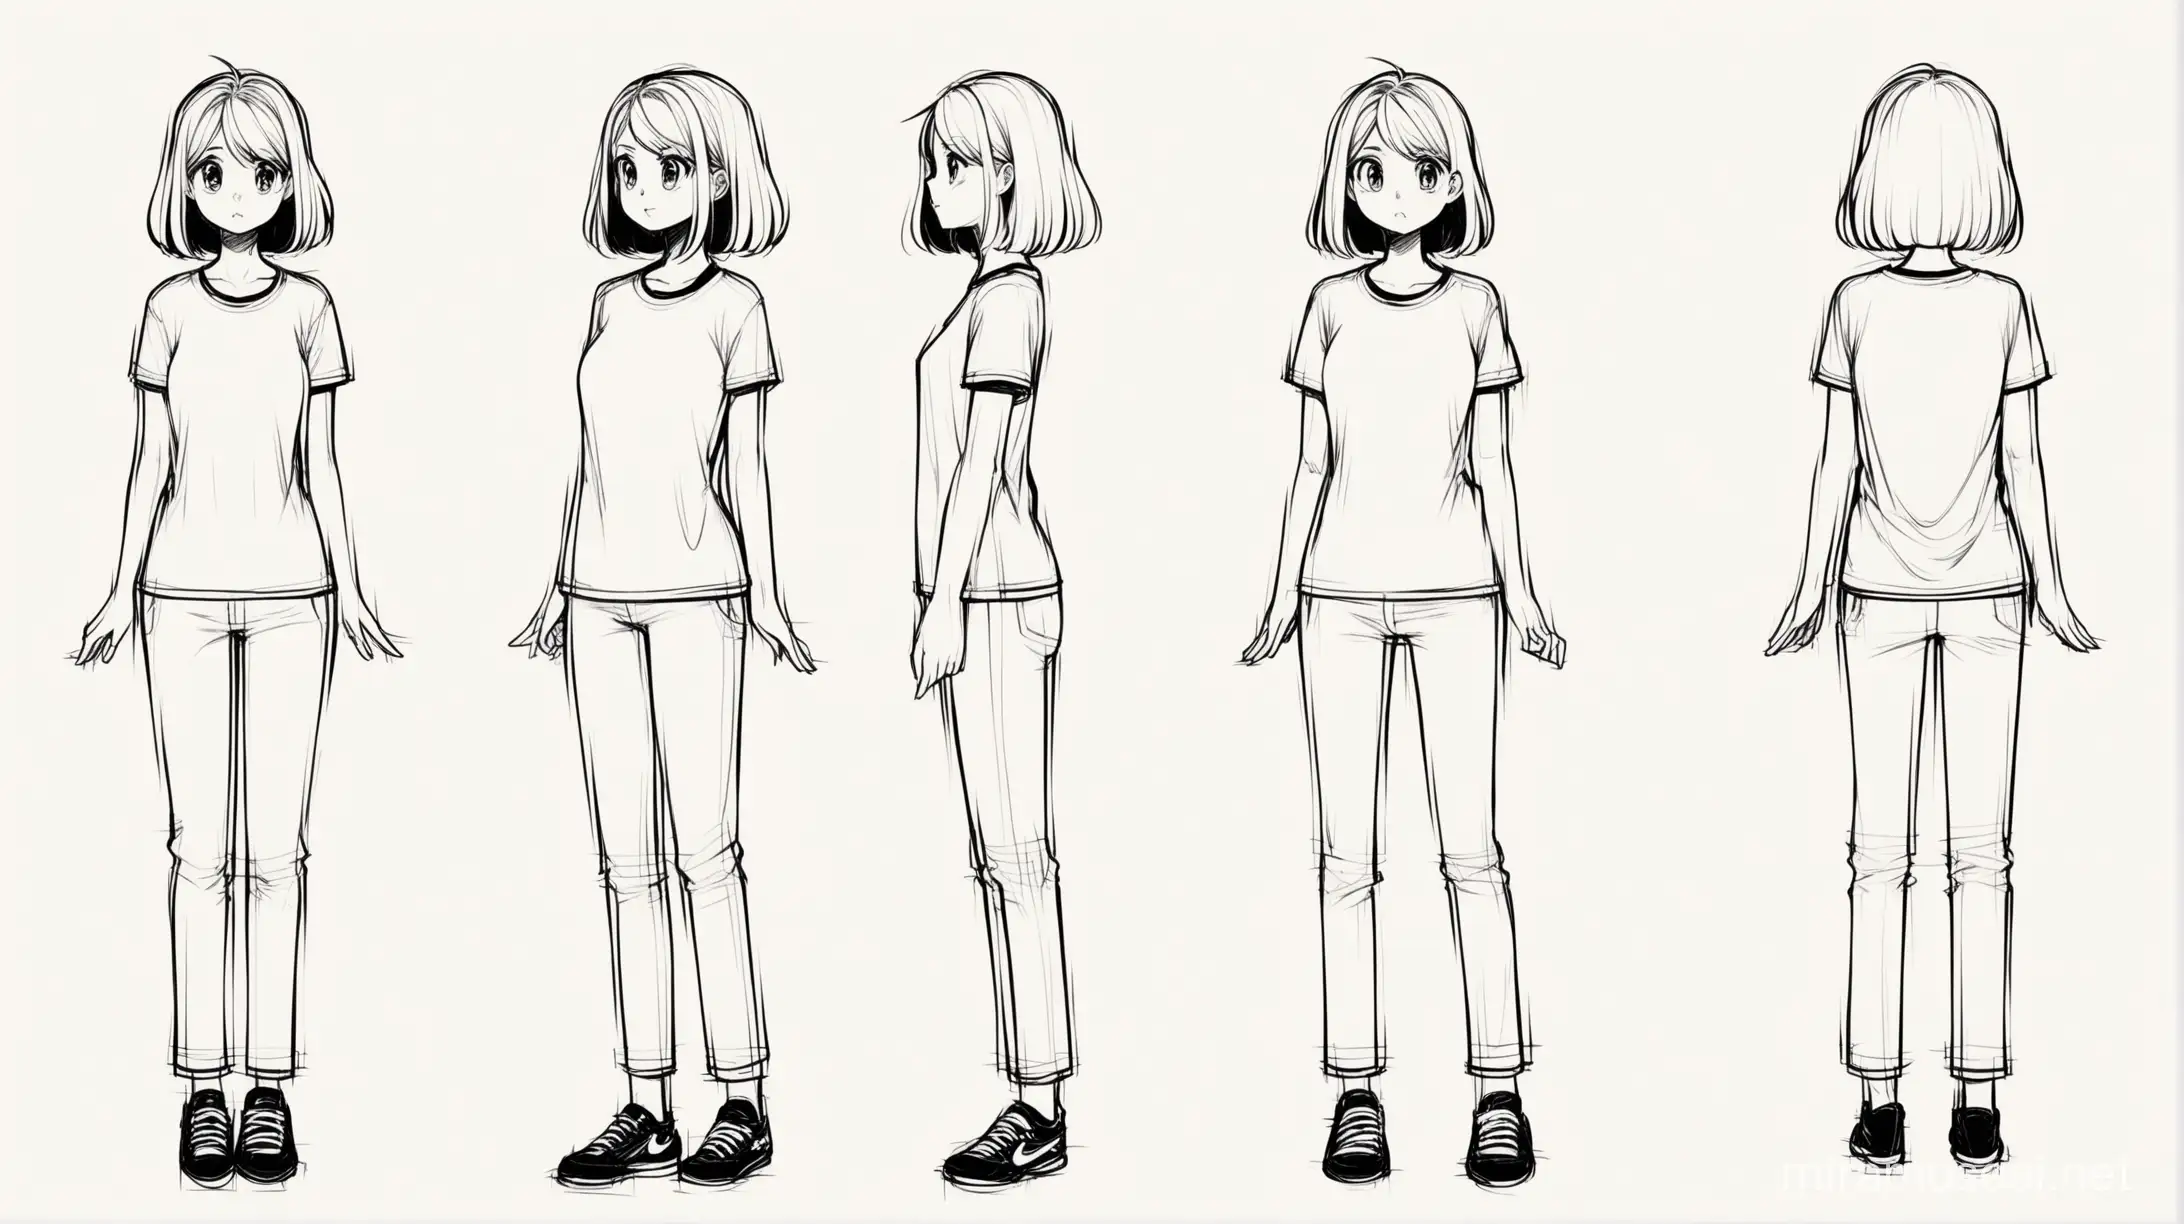 Can you draw this girl character for me from different angles in linear and black and white, and draw strange cartoon hair with a short sleeve t-shirt and pants.